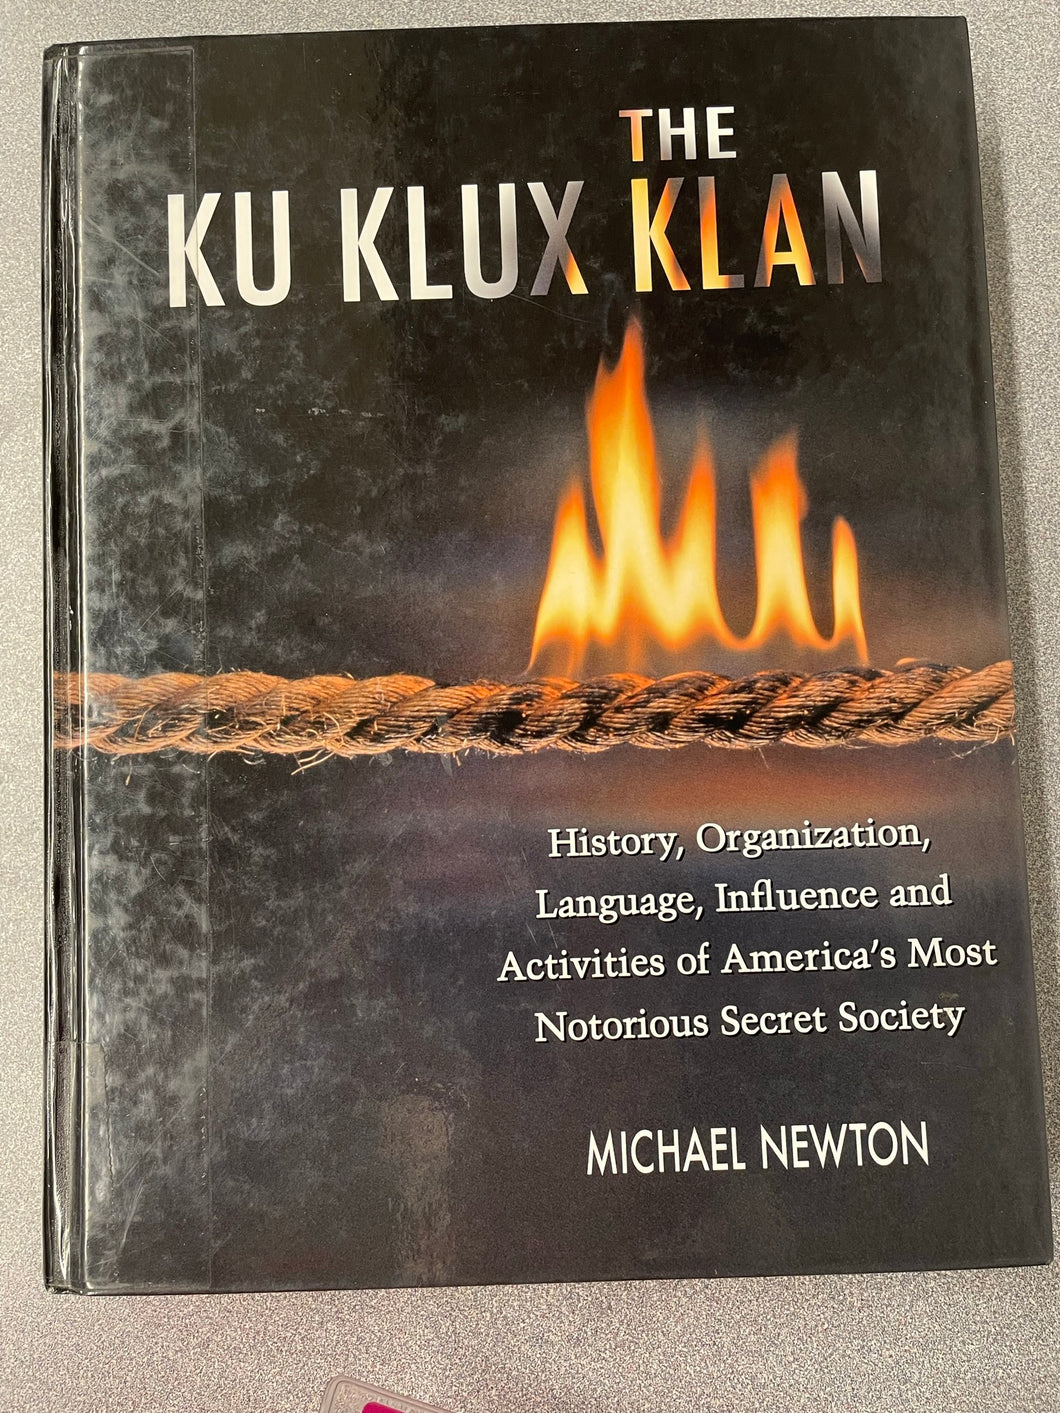 The Ku Klux Klan: History, Organization, Language, Influence and Activities of America's Most Notorious Secret Society, Newton, Michael  [2007] H 4/23